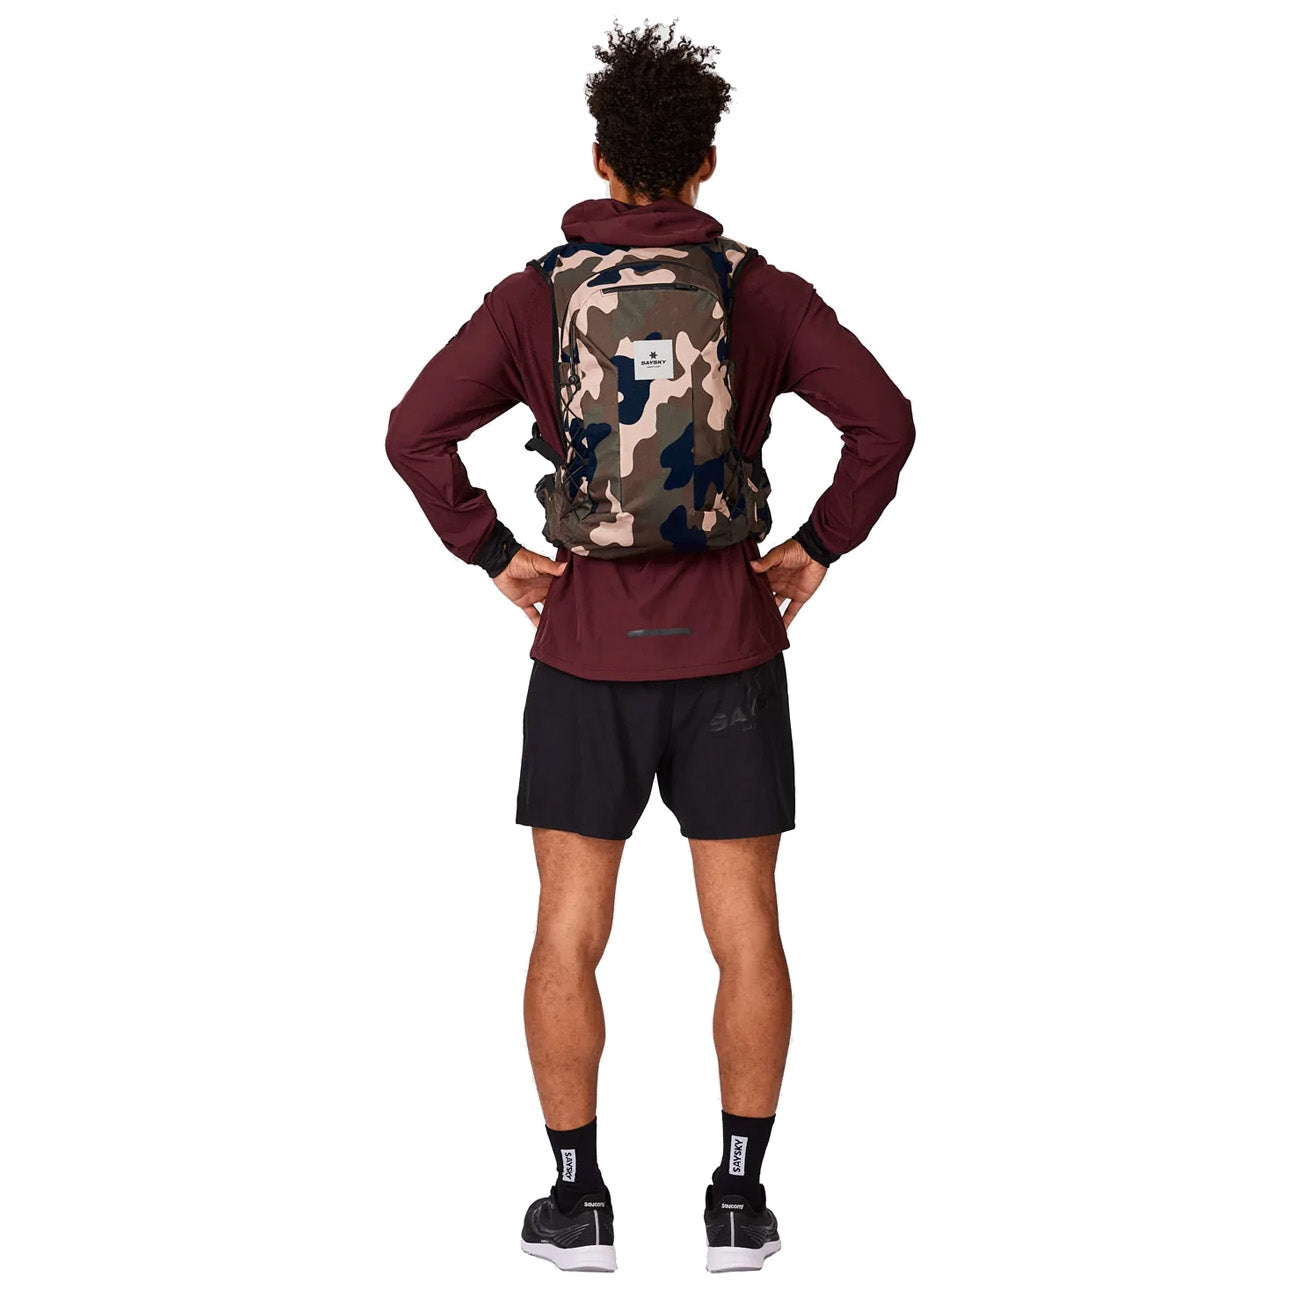 Saysky Running Commuter Backpack 12L Woodland Camo